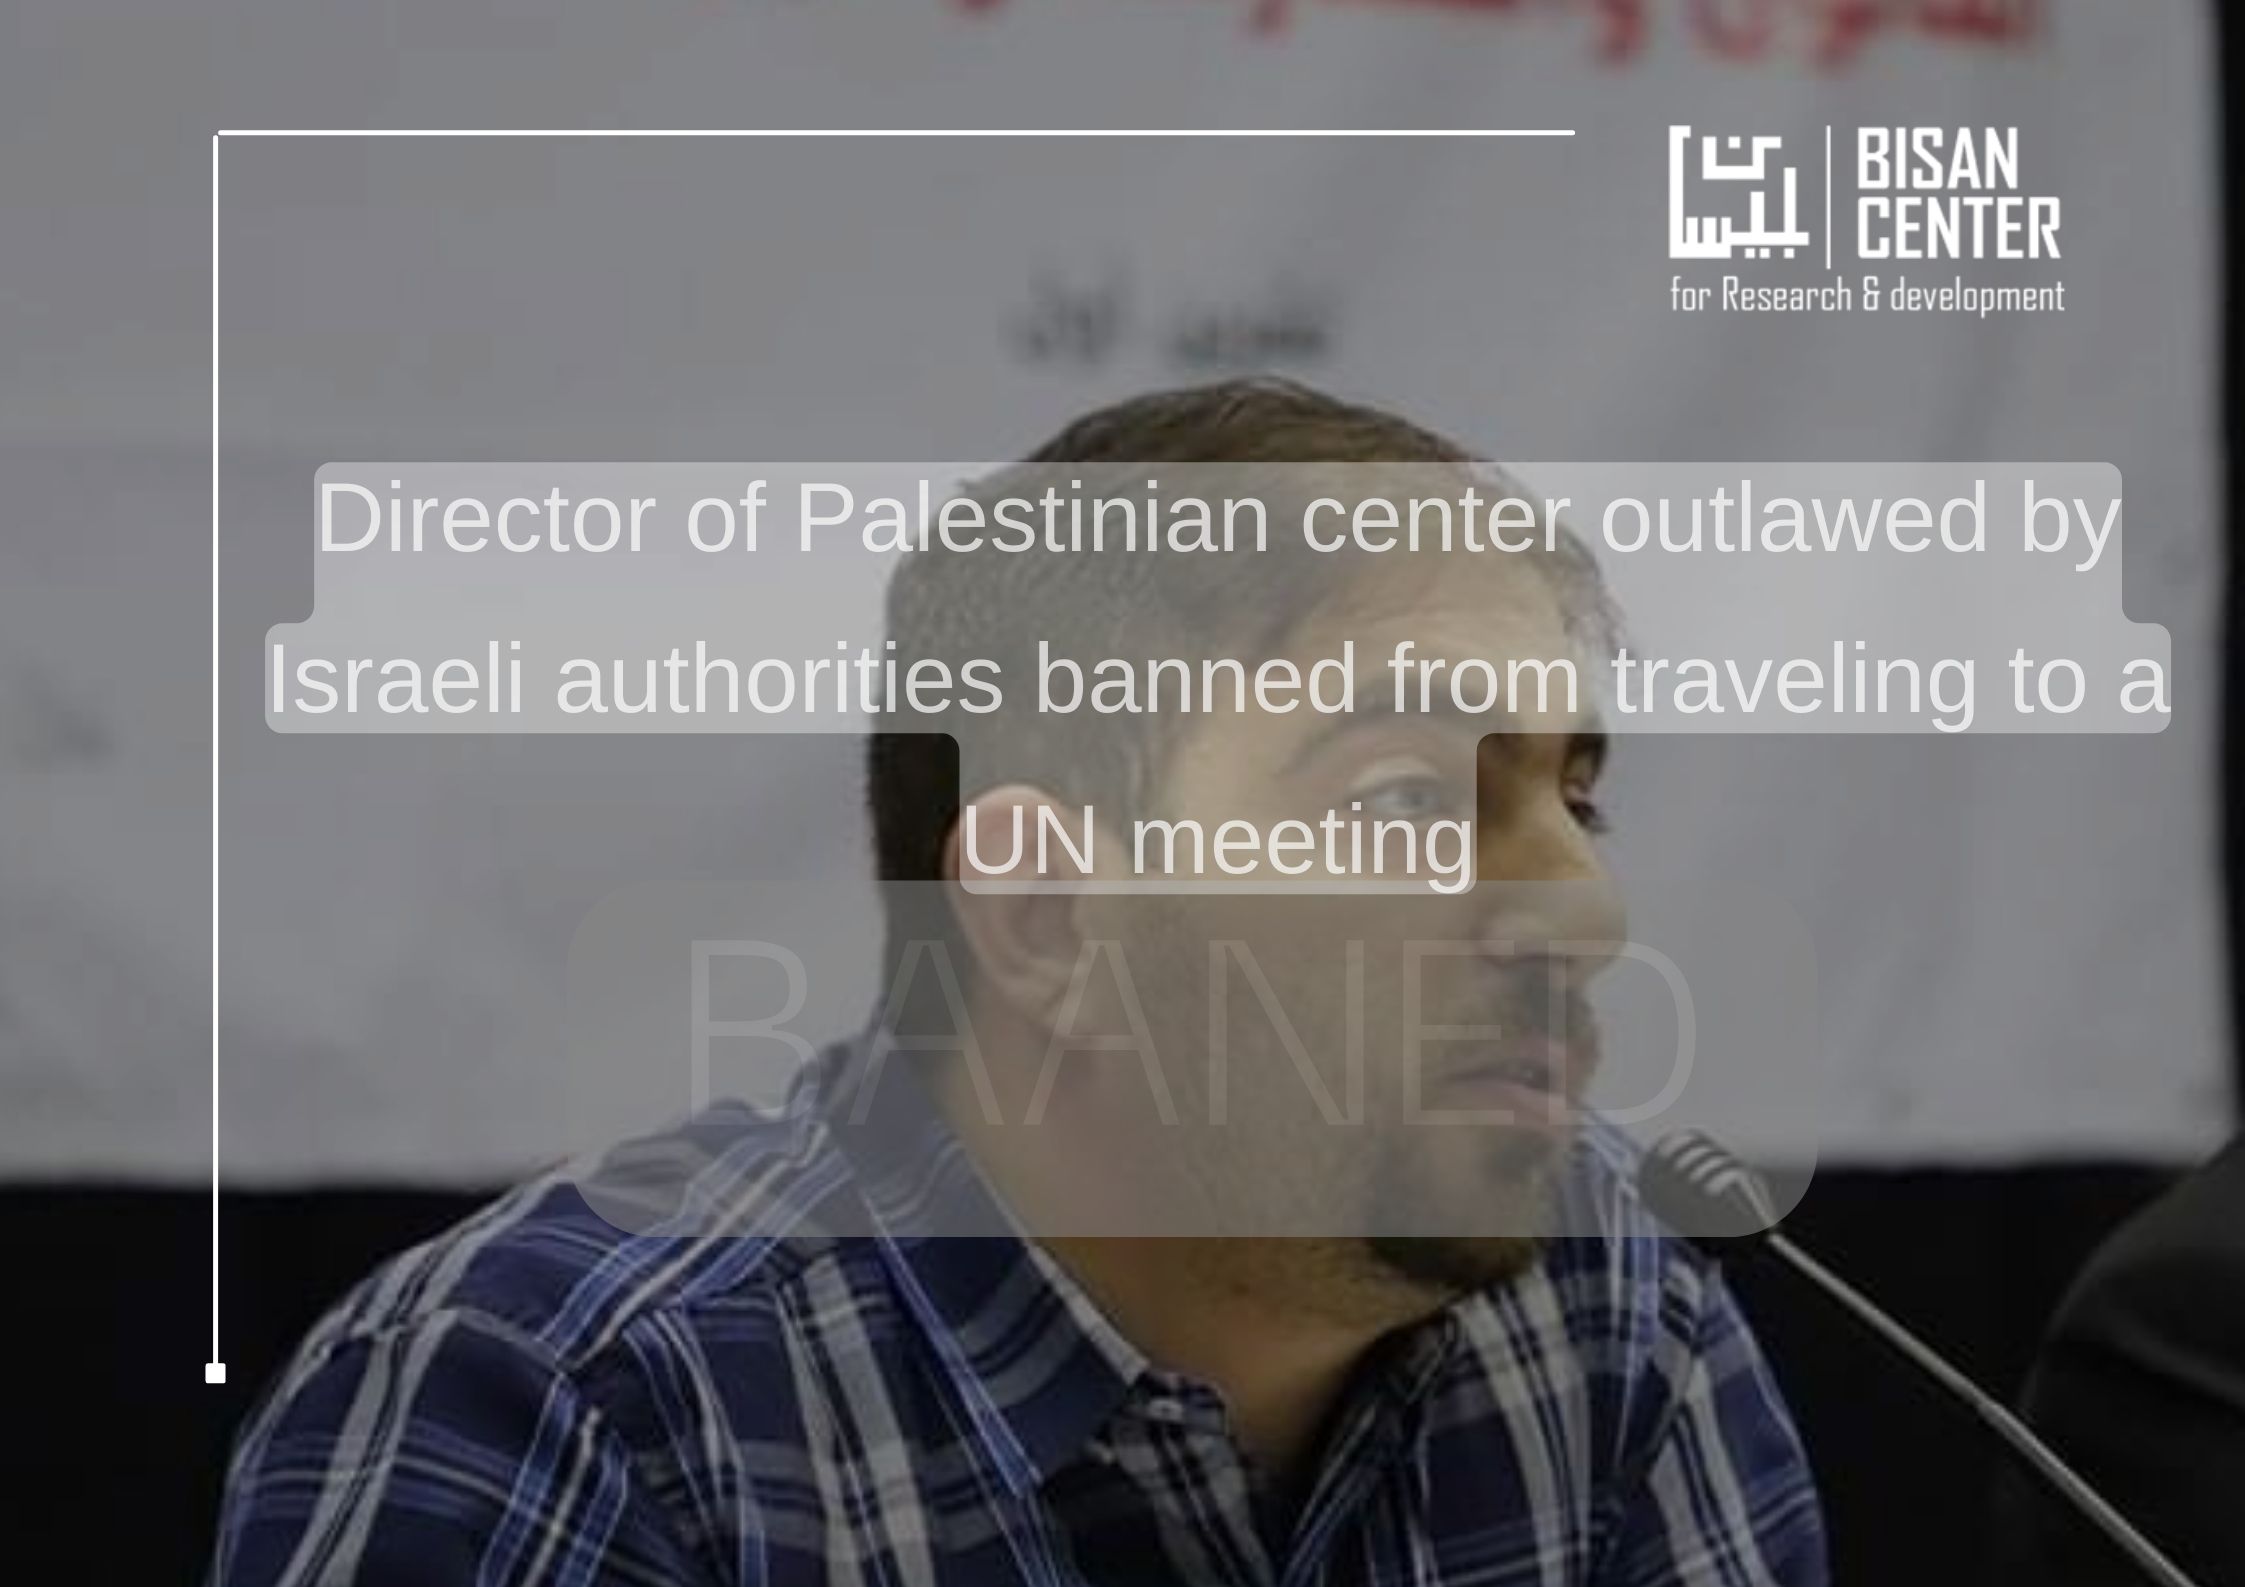 Press Release| Director of Palestinian center outlawed by Israeli authorities banned from traveling to a UN meeting